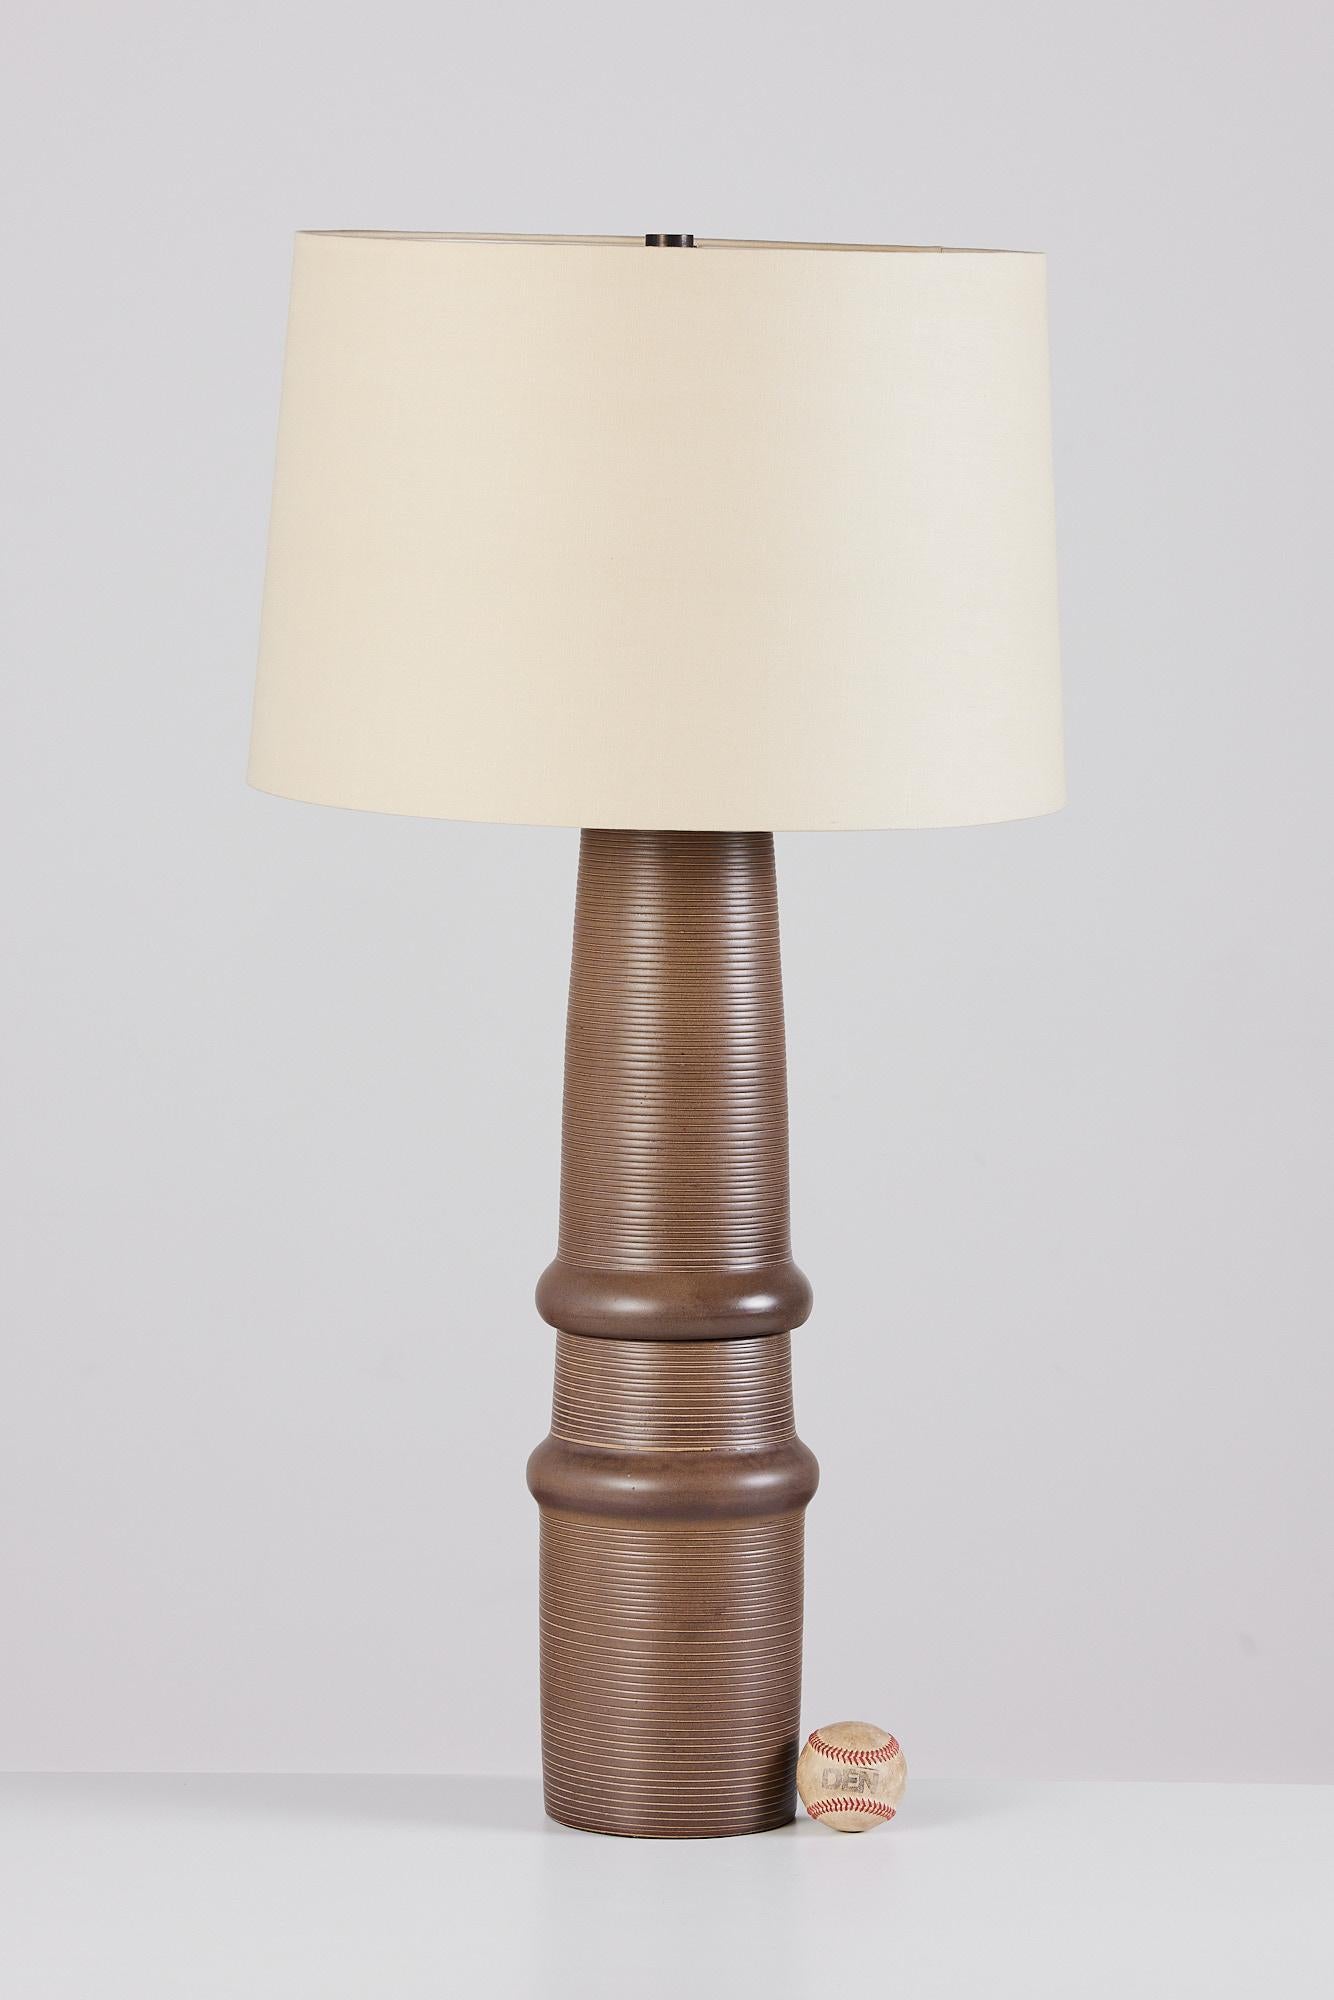 A tall and striking ceramic lamp by husband-and-wife design team Gordon and Jane Martz. Produced by their family company, Marshall Studios in Indiana beginning in 1957. The Model 172 lamp has an organic form with a ribbed texture produced by